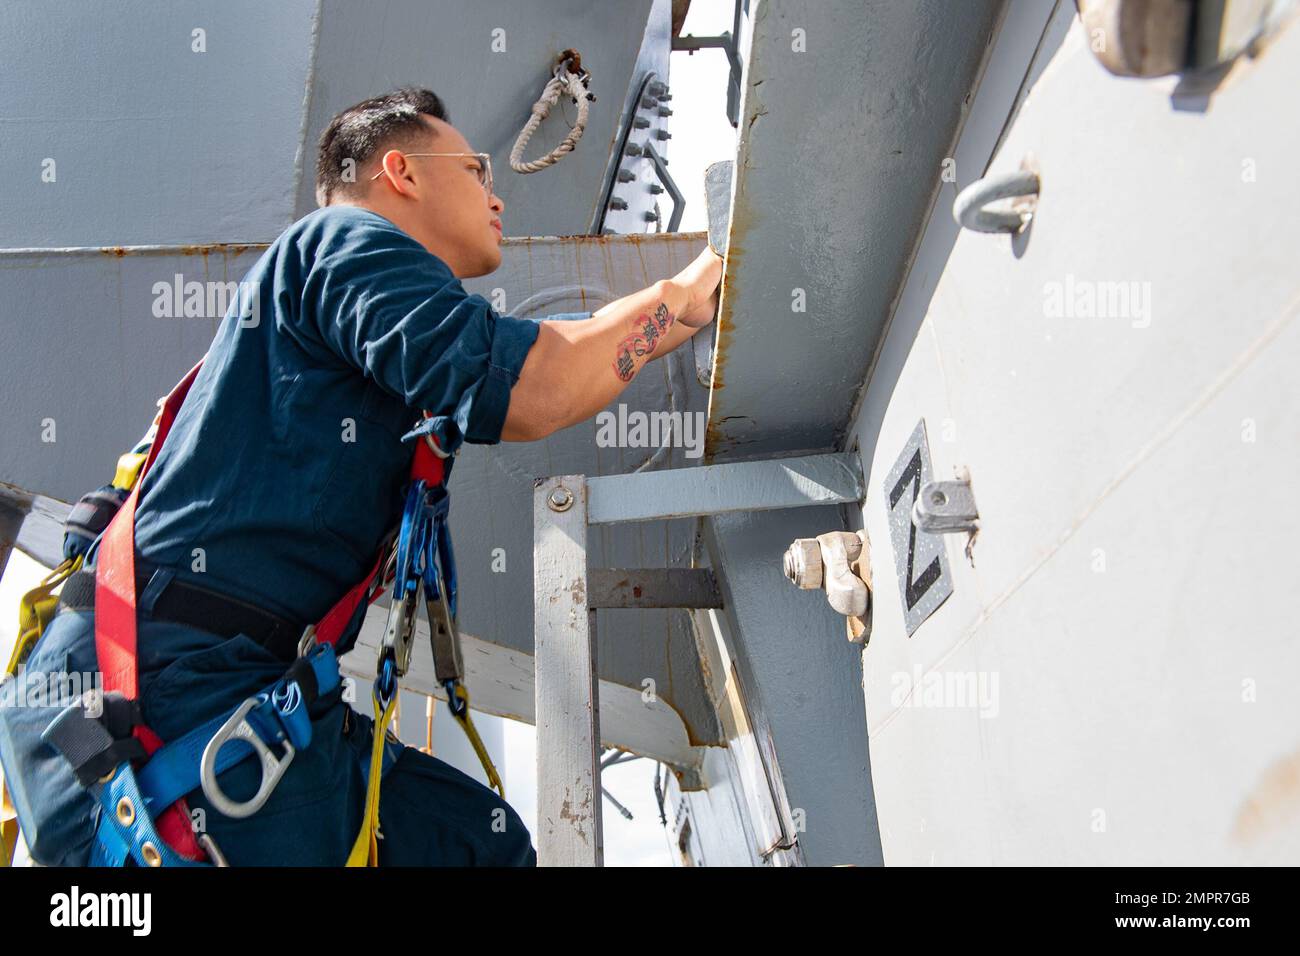 PHILIPPINE SEA (Nov. 15, 2022) Electrician’s Mate 2nd Class Jerome Dedicatoria, from San Diego, prepares to troubleshoot equipment on the mast aboard Arleigh Burke-class guided-missile destroyer USS Milius (DDG 69) while operating in the Philippine Sea, Nov. 15. Milius is assigned to Commander, Task Force 71/Destroyer Squadron (DESRON) 15, the Navy’s largest forward-deployed DESRON and the U.S. 7th Fleet’s principal surface force. Stock Photo